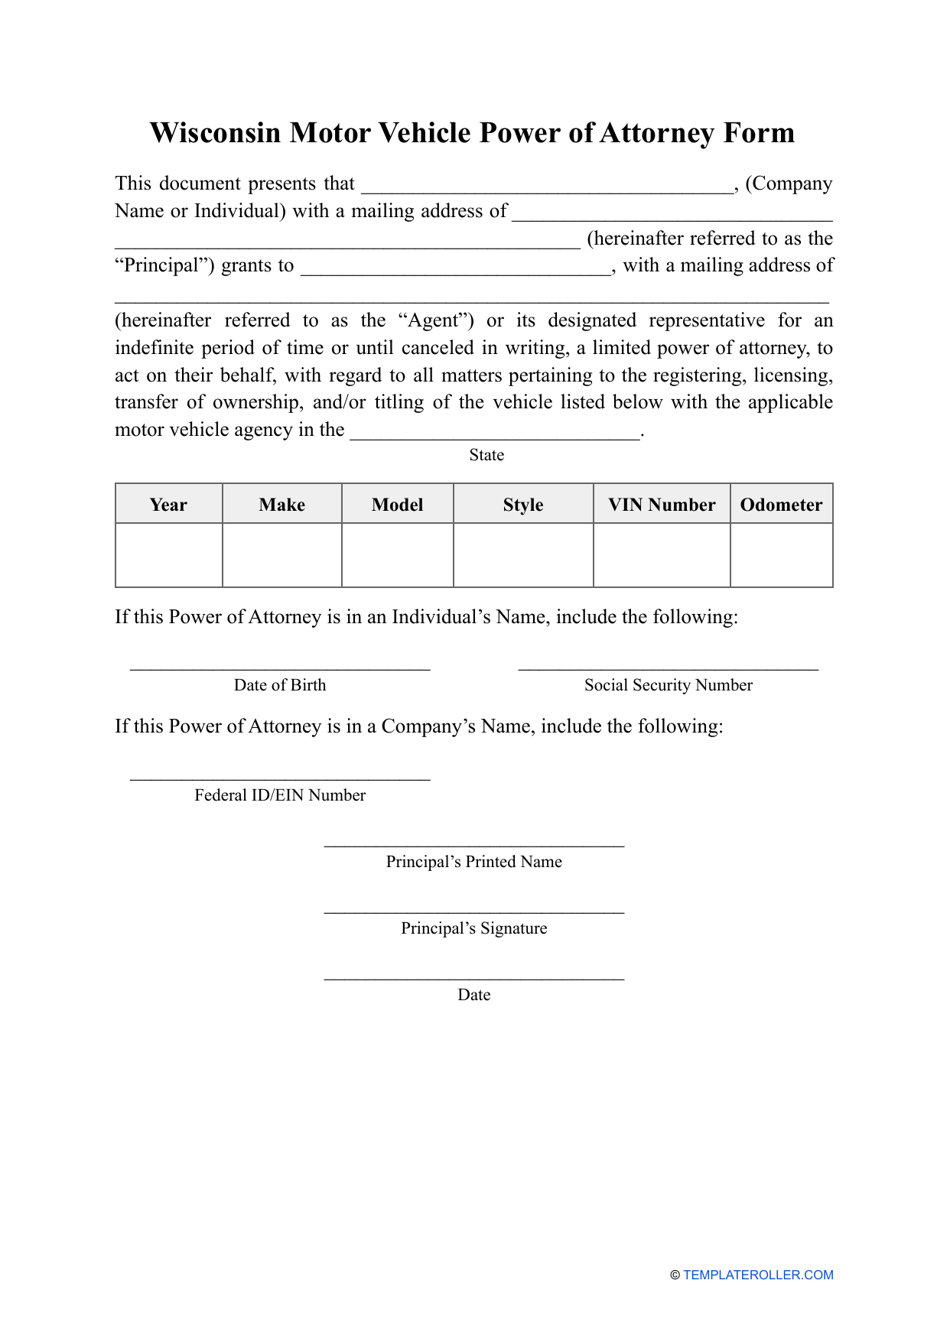 Motor Vehicle Power of Attorney Form - Wisconsin, Page 1